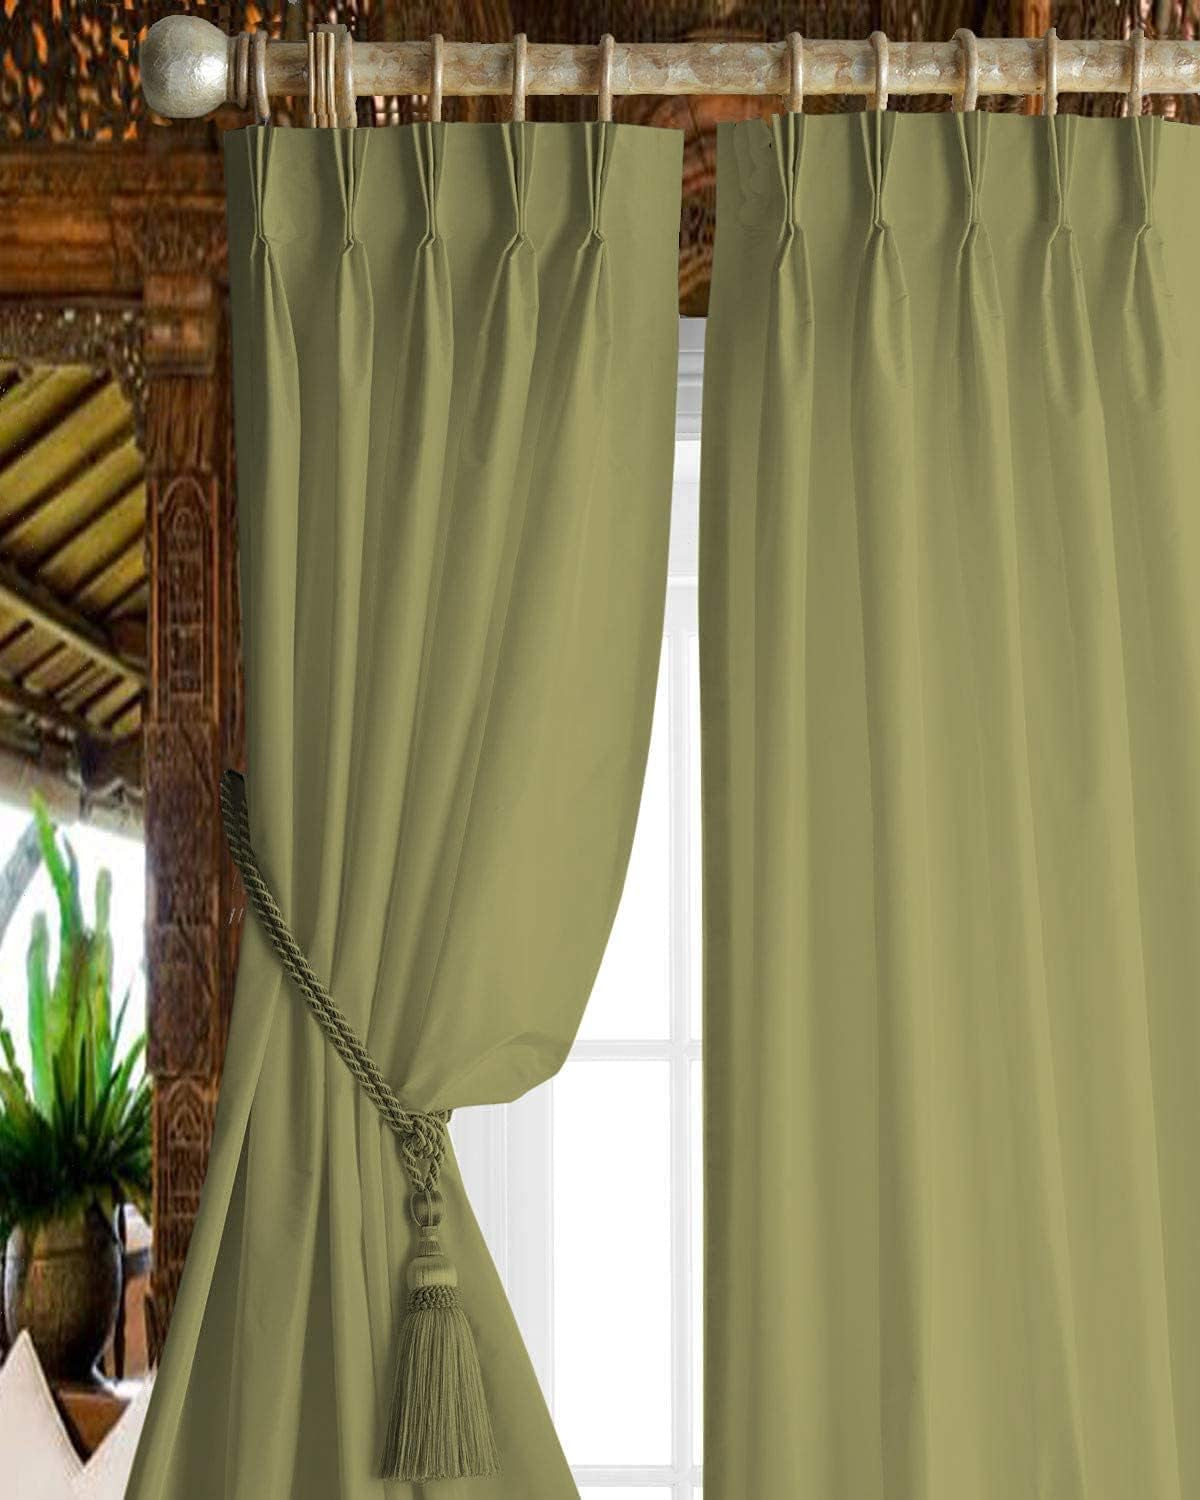 Magic Drapes Pinch Pleated Curtains Triple Pinch Pleat Drapes with Tiebacks & Hooks Blackout Thermal Room Darkening Window Curtains for Living Room, Bedroom, Hall W(26"+26") L45 (2 Panels, Royal Blue)  Magic Drapes Solid - Bottle Green 42"X 120" 